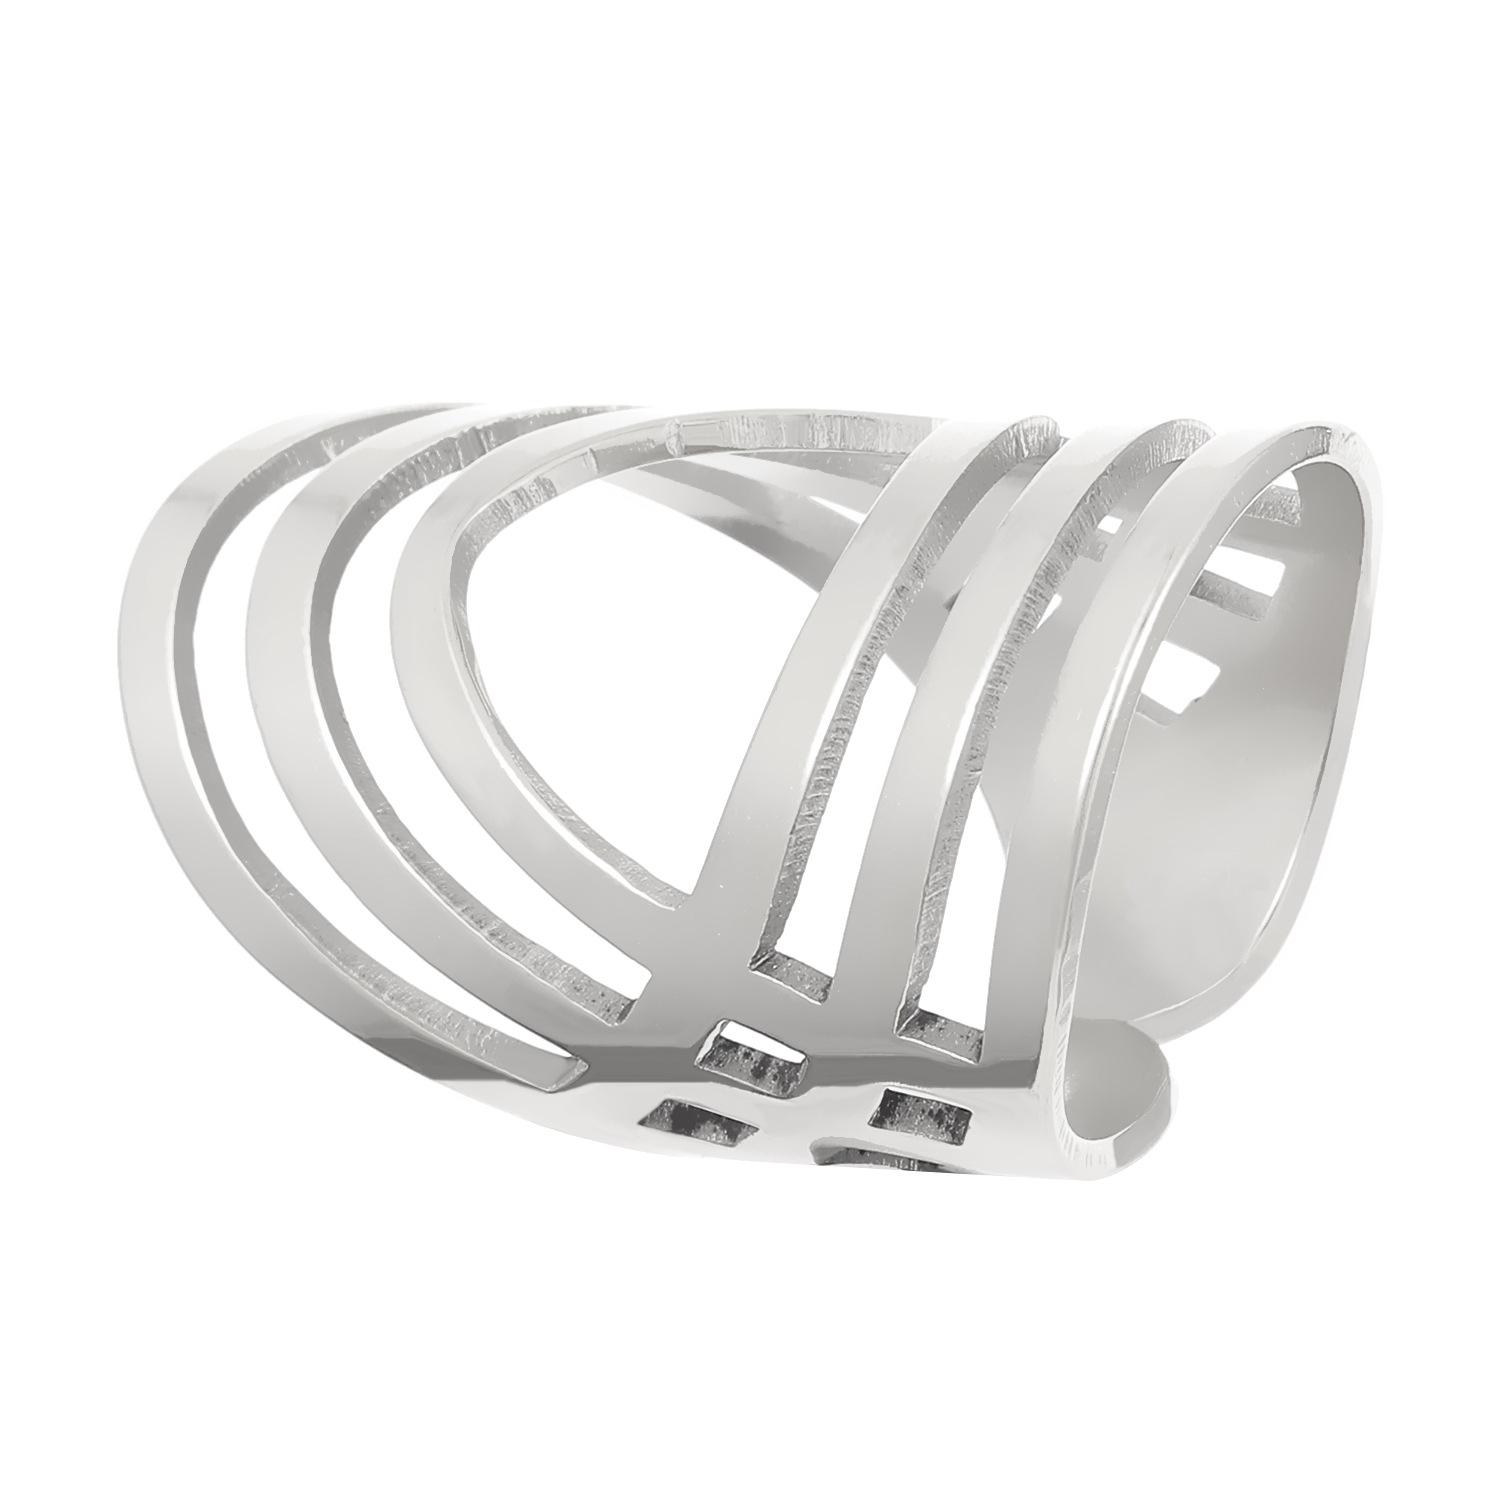 03 White KN-069 (Stainless steel)